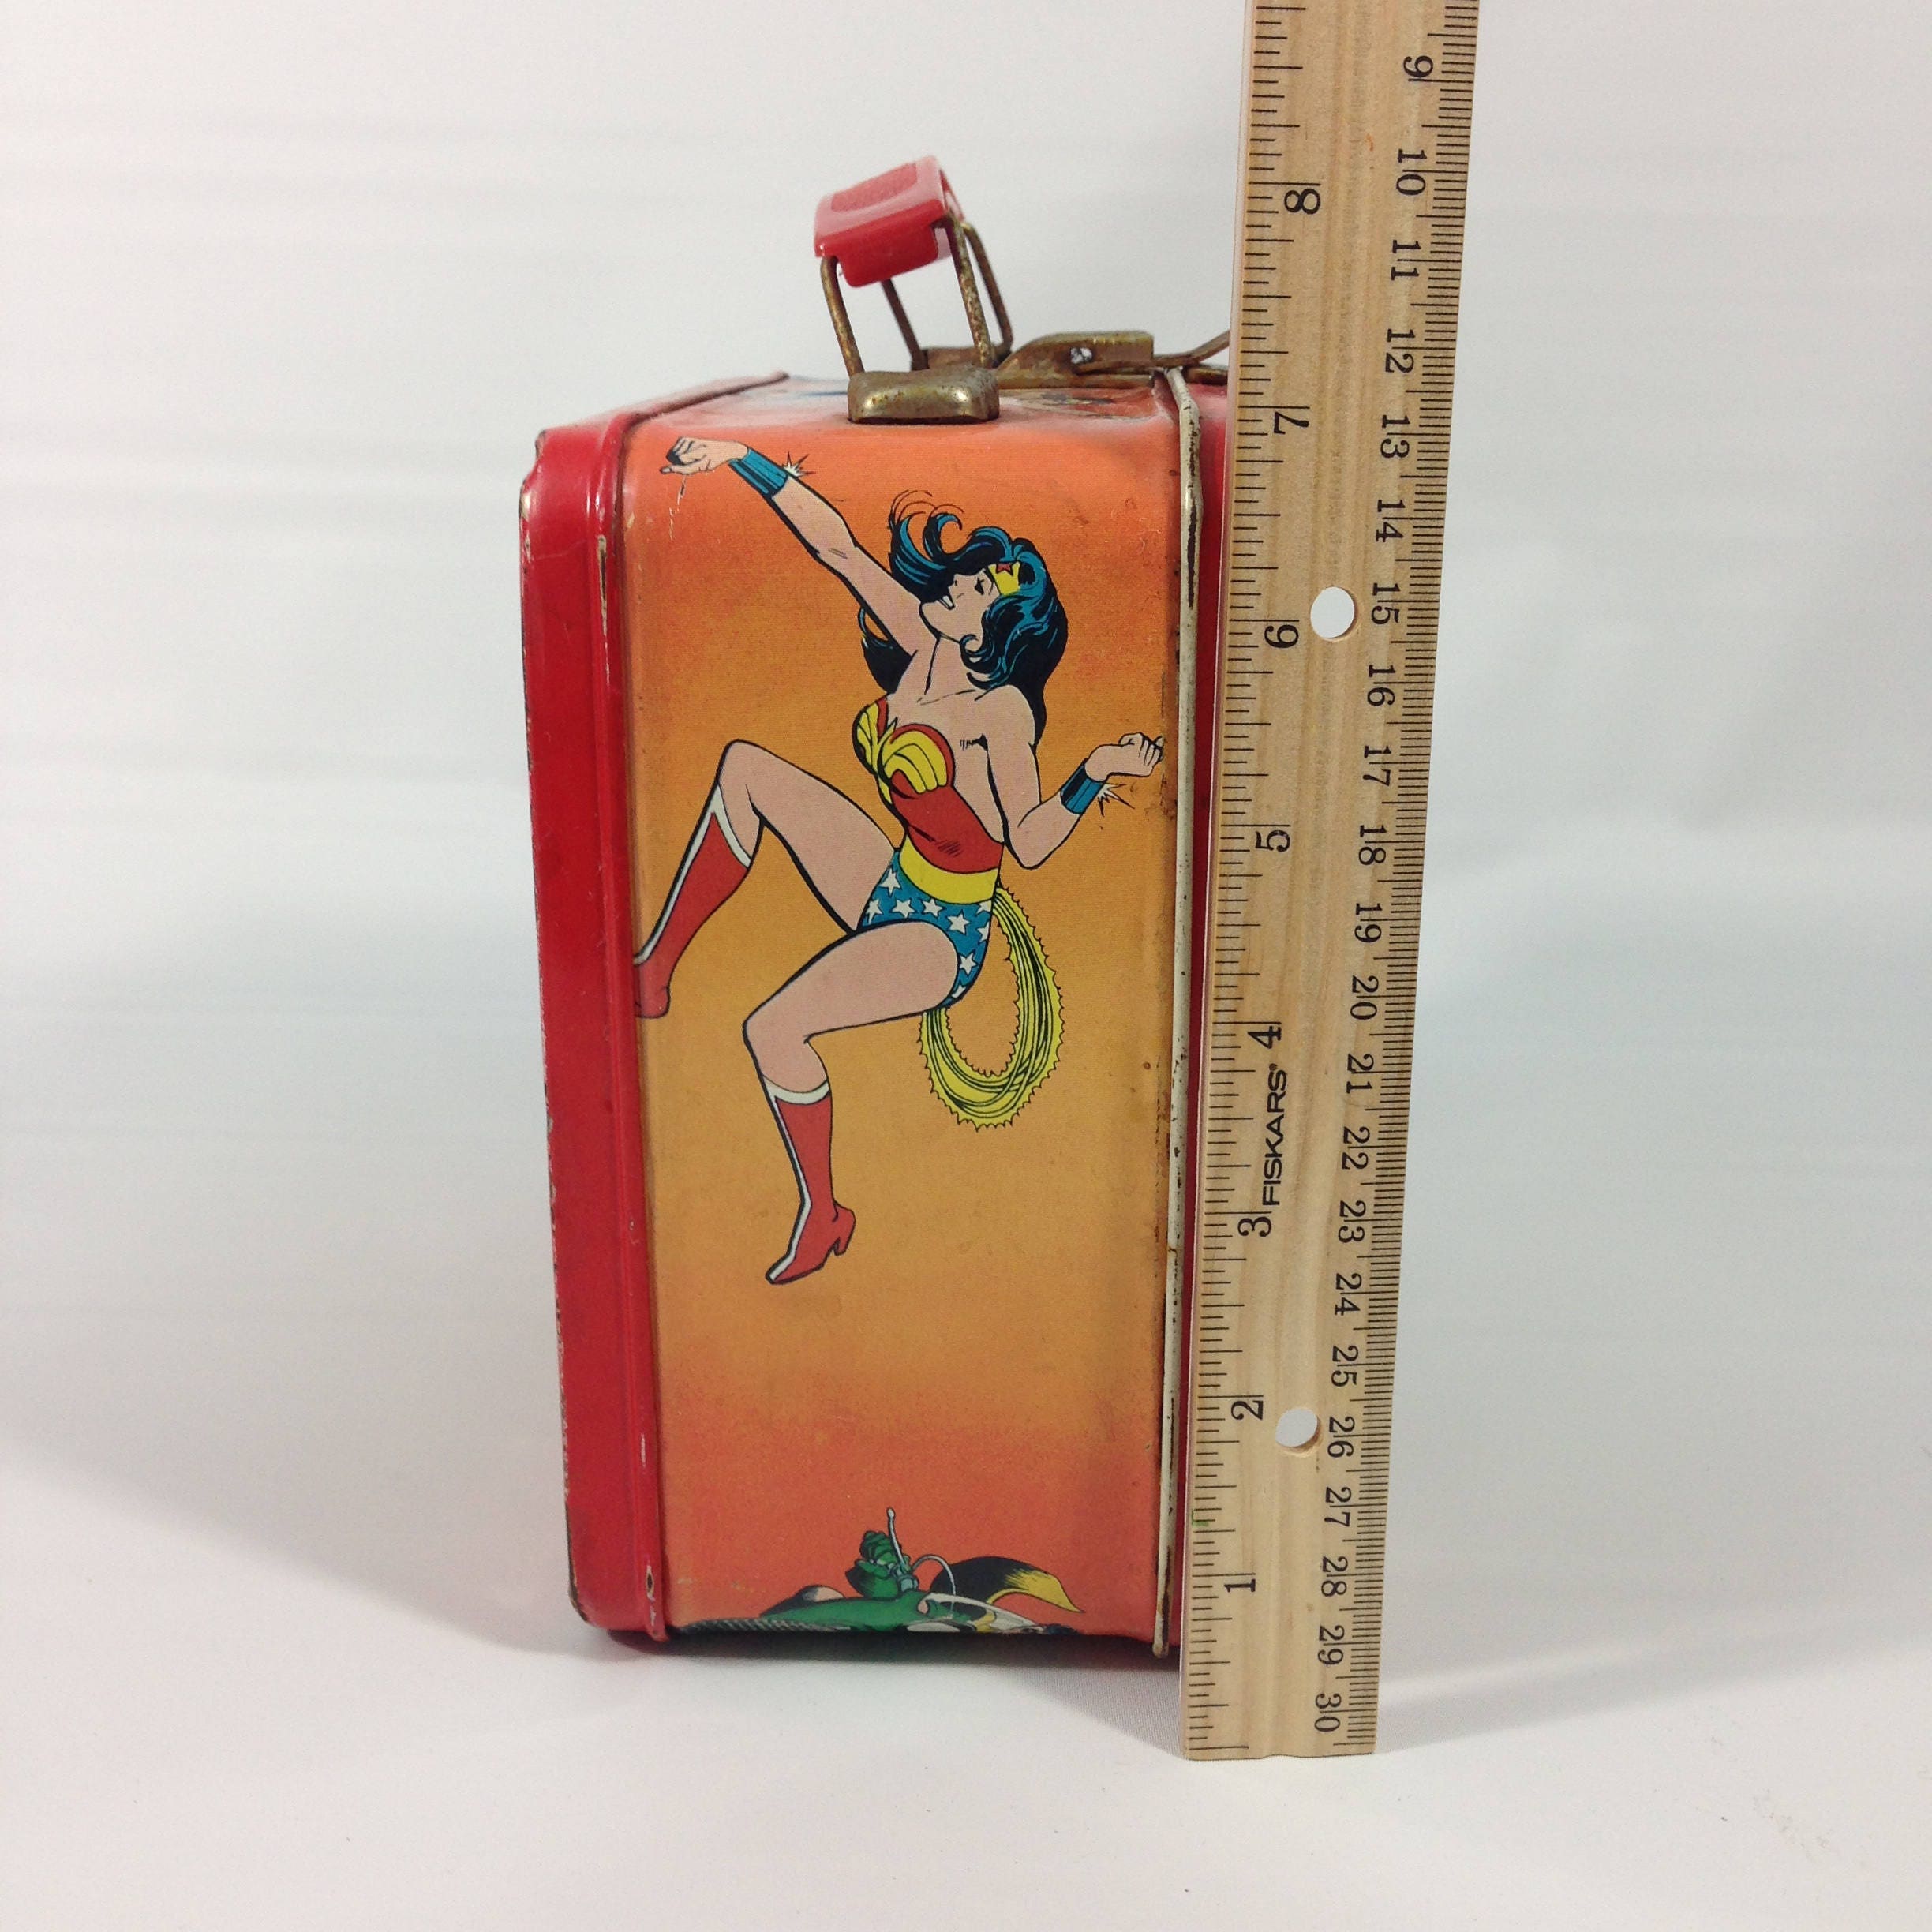 Thermos Dual Compartment Lunch Kit Wonder Woman with Cape